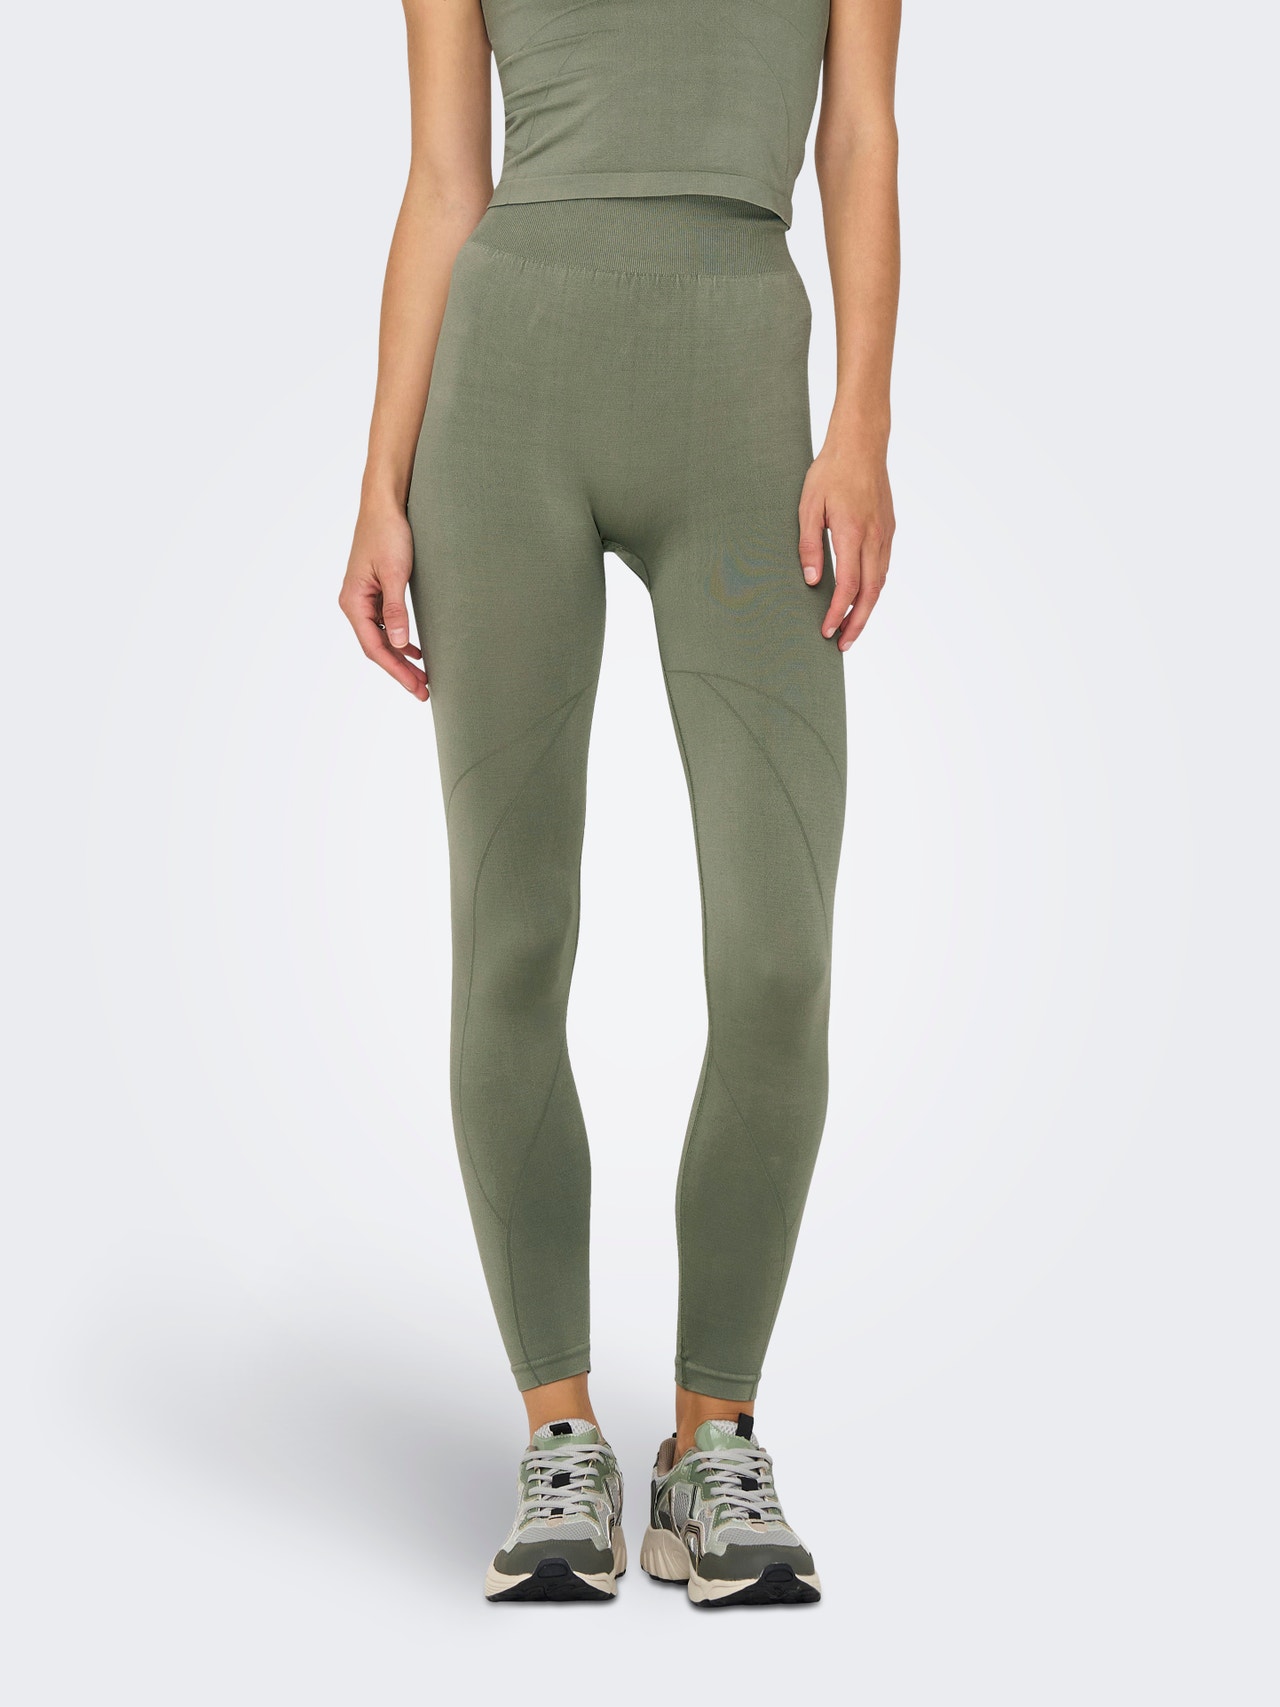 ONLY Tight fit High waist Legging -Dusty Olive - 15296999